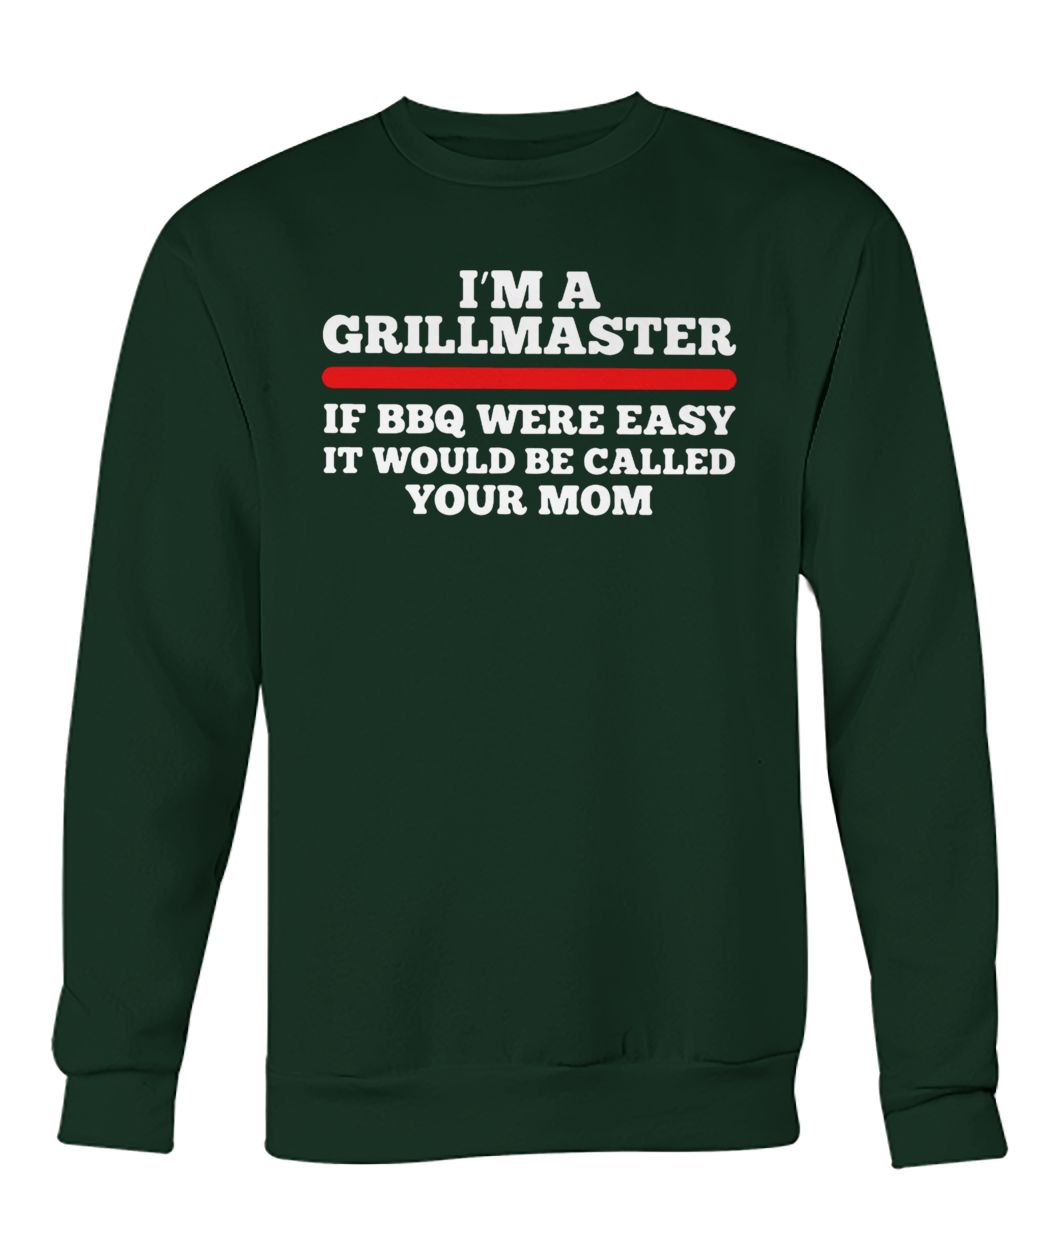 I’m a grillmaster if bbq were easy if would be called your mom crew neck sweatshirt